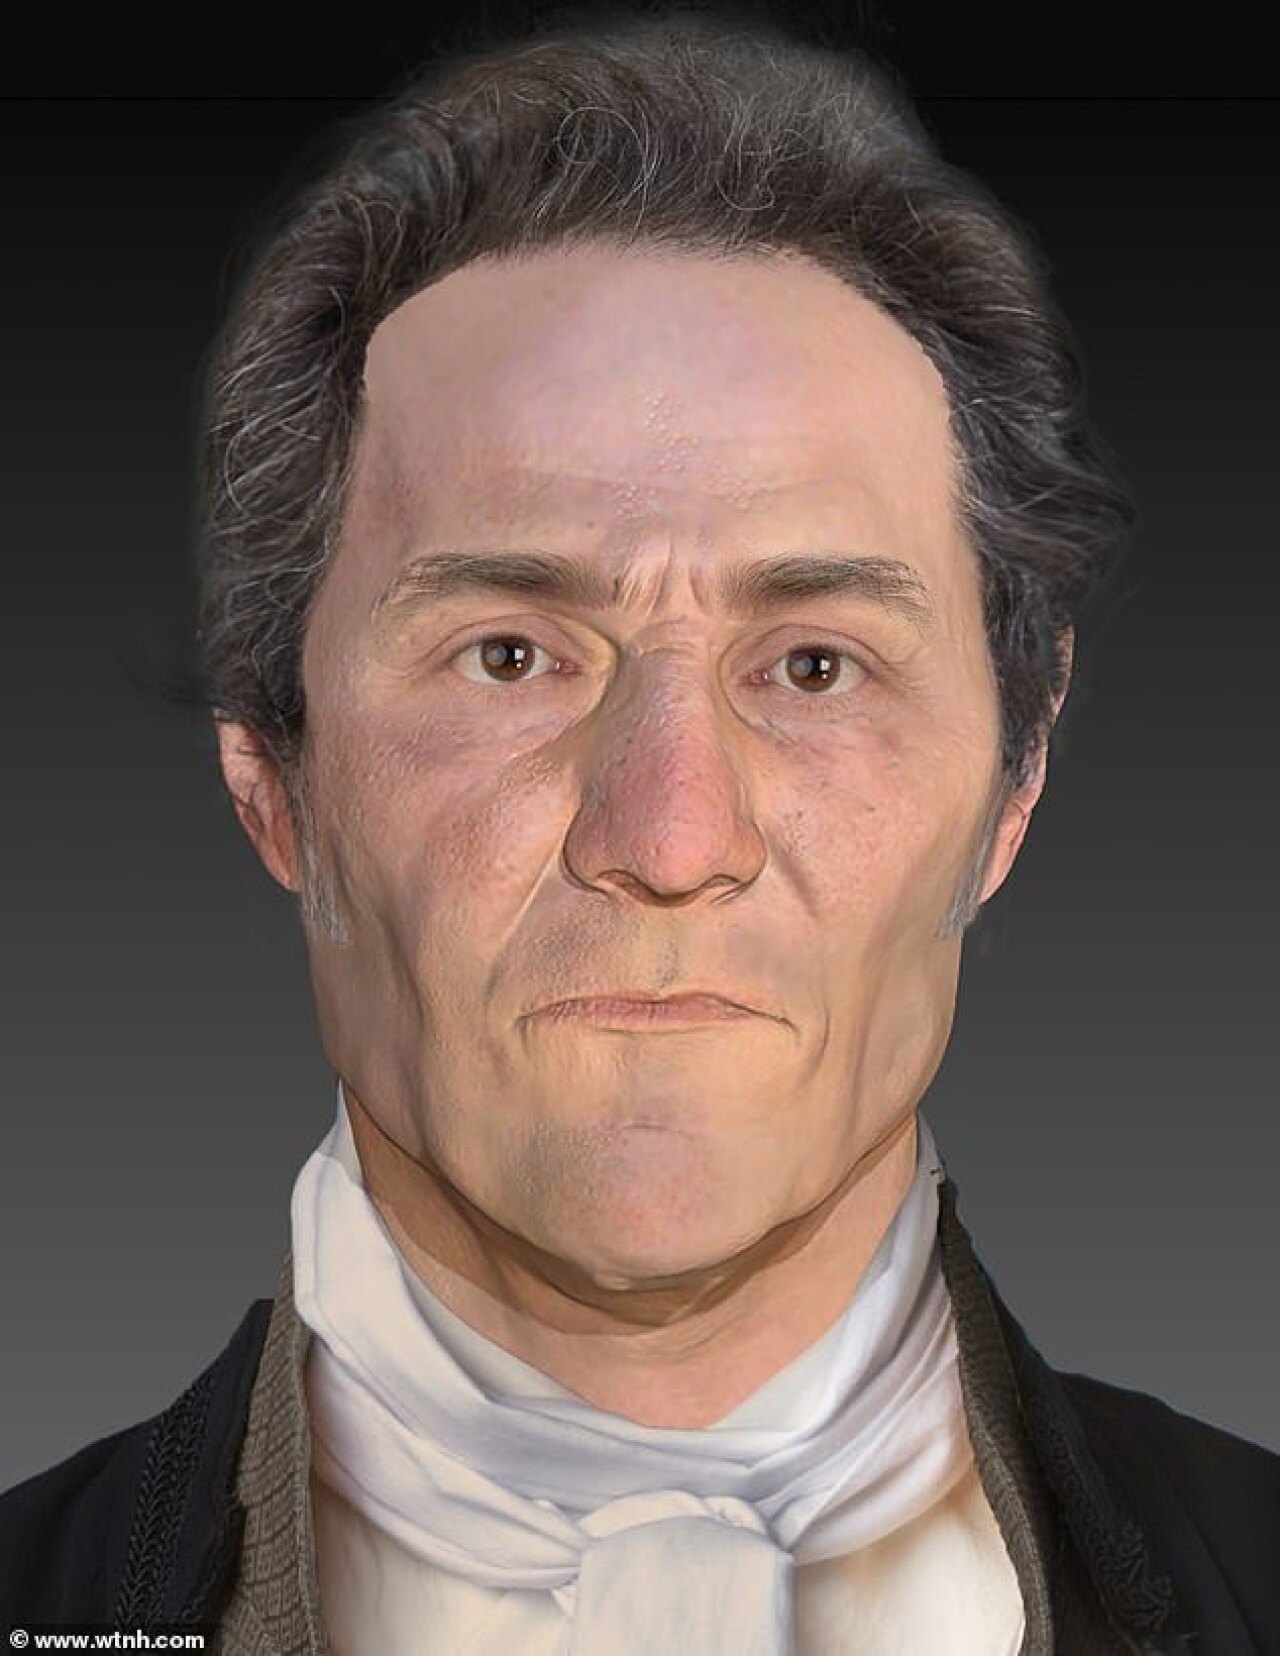 [IMAGE] Face of 18th century Connecticut man who was mistaken for a VAMPIRE